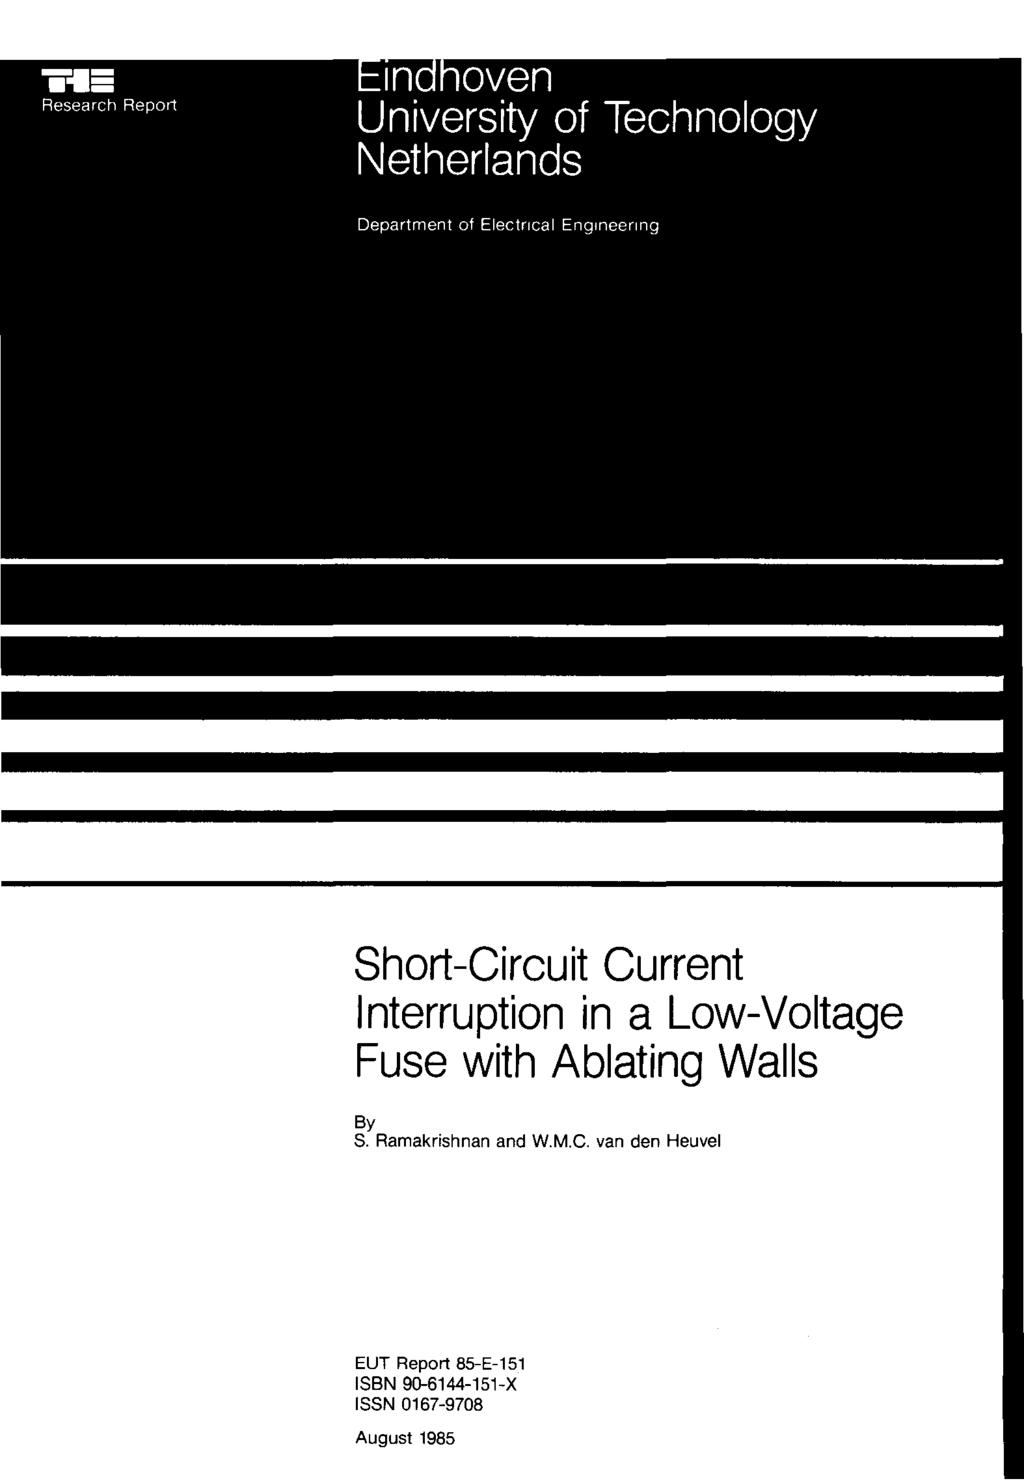 Shrt-Circuit Current Interruptin in a Lw-Vltage Fuse with Ablating Walls By S.